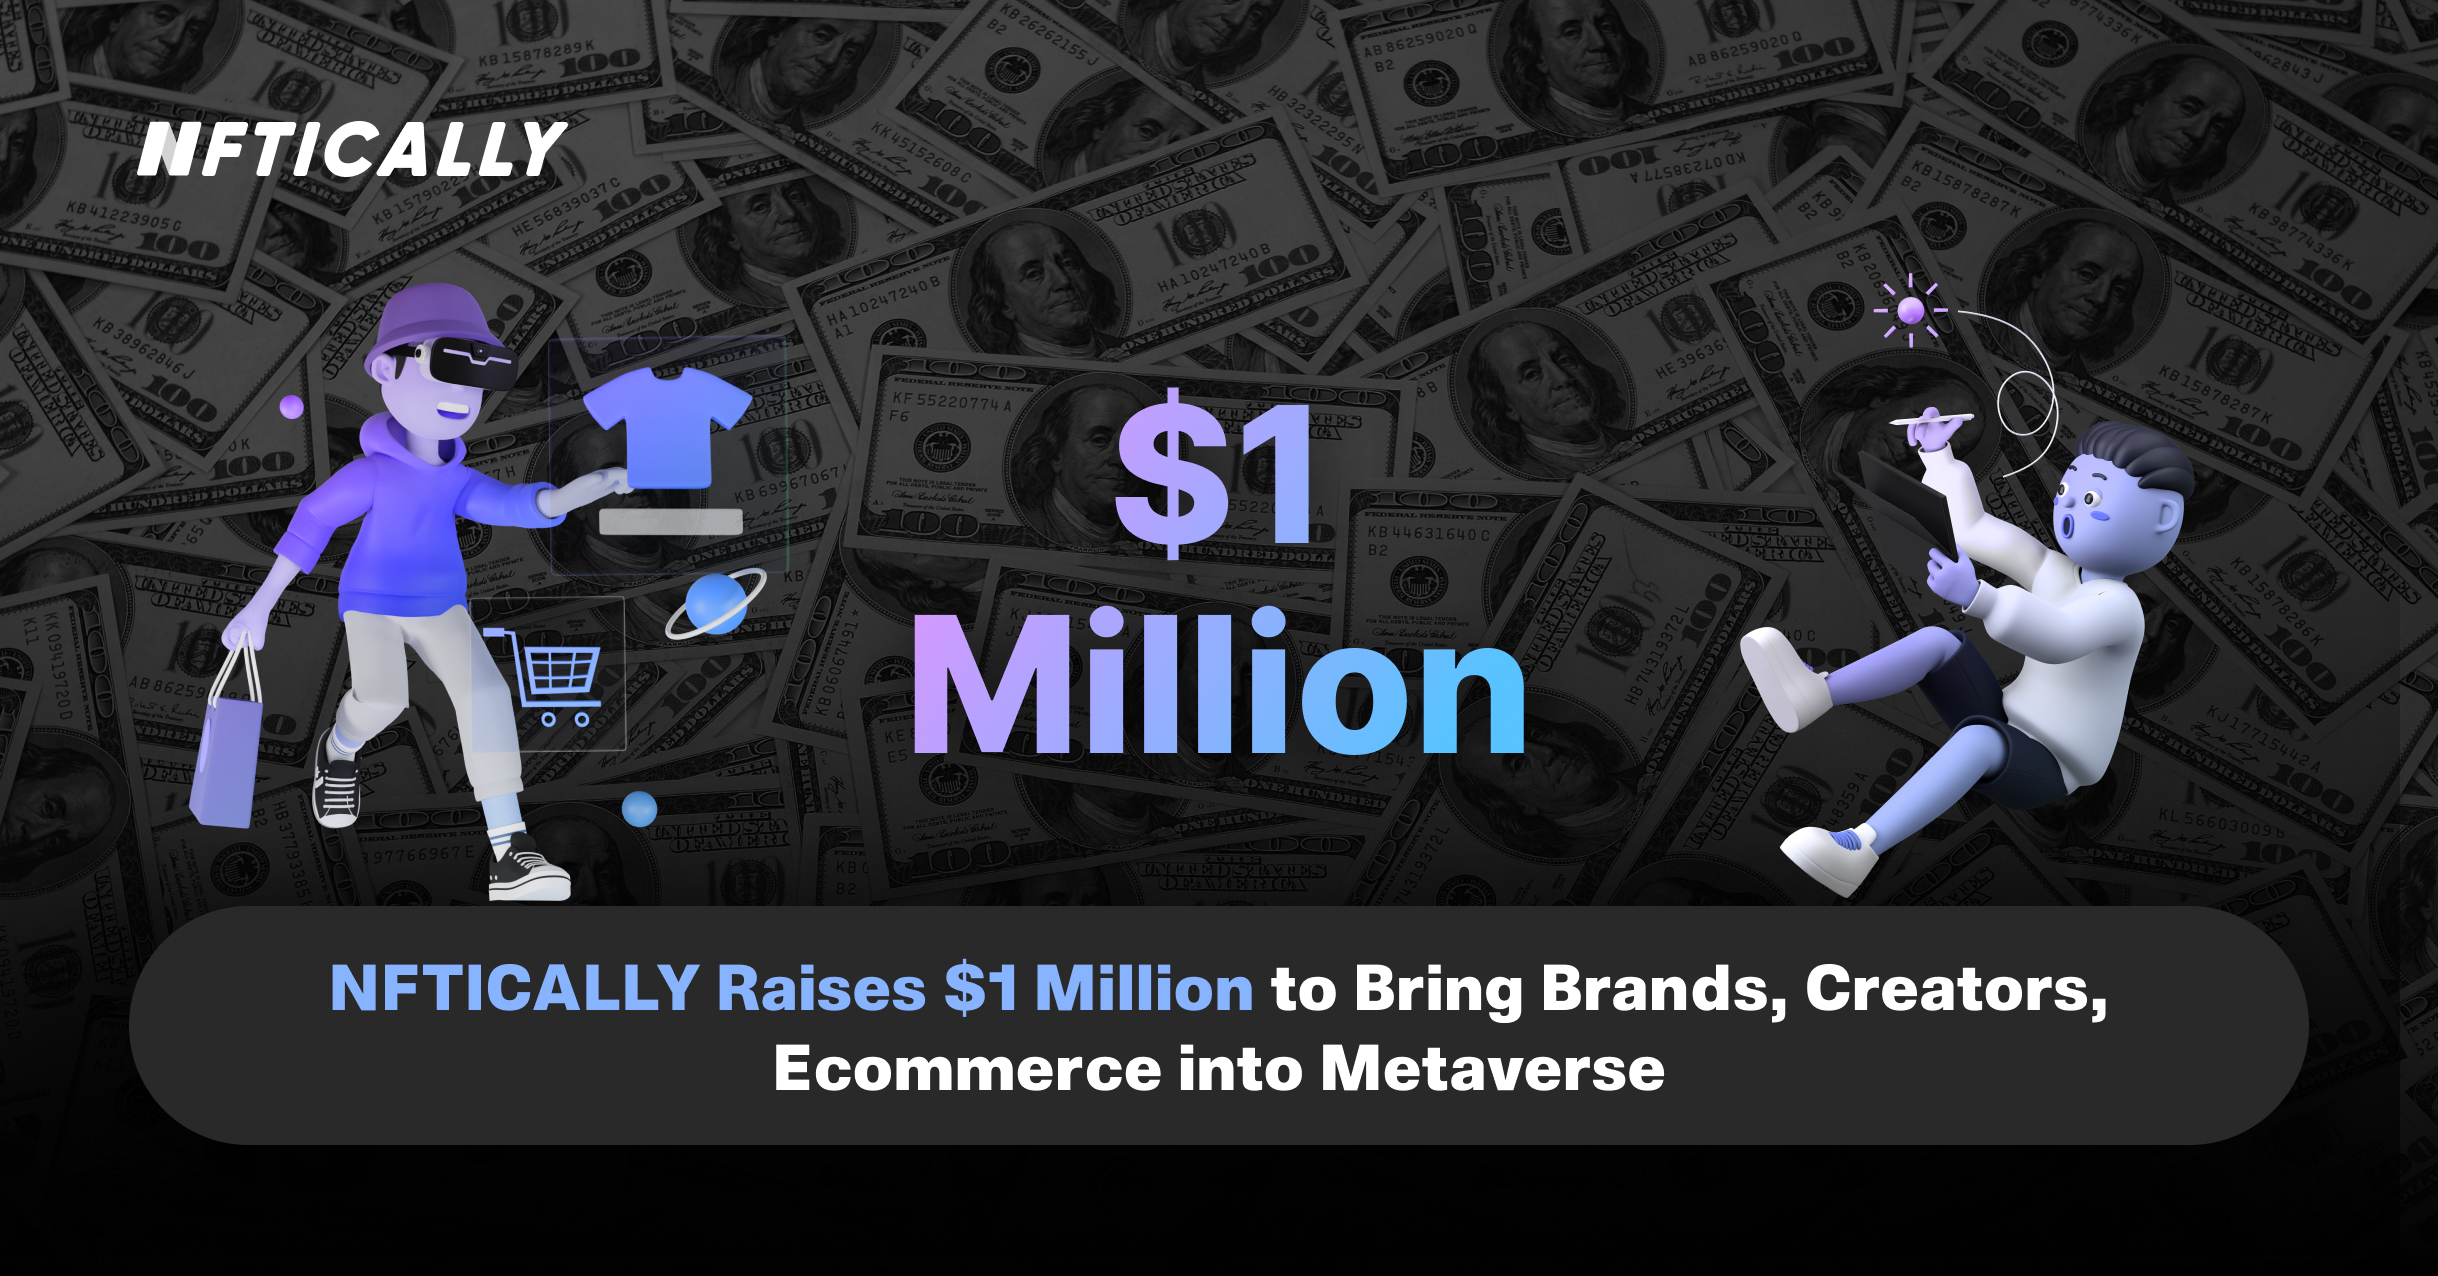 NFTICALLY Raises $1 Million to Bring Brands, Creators, Ecommerce into Metaverse 